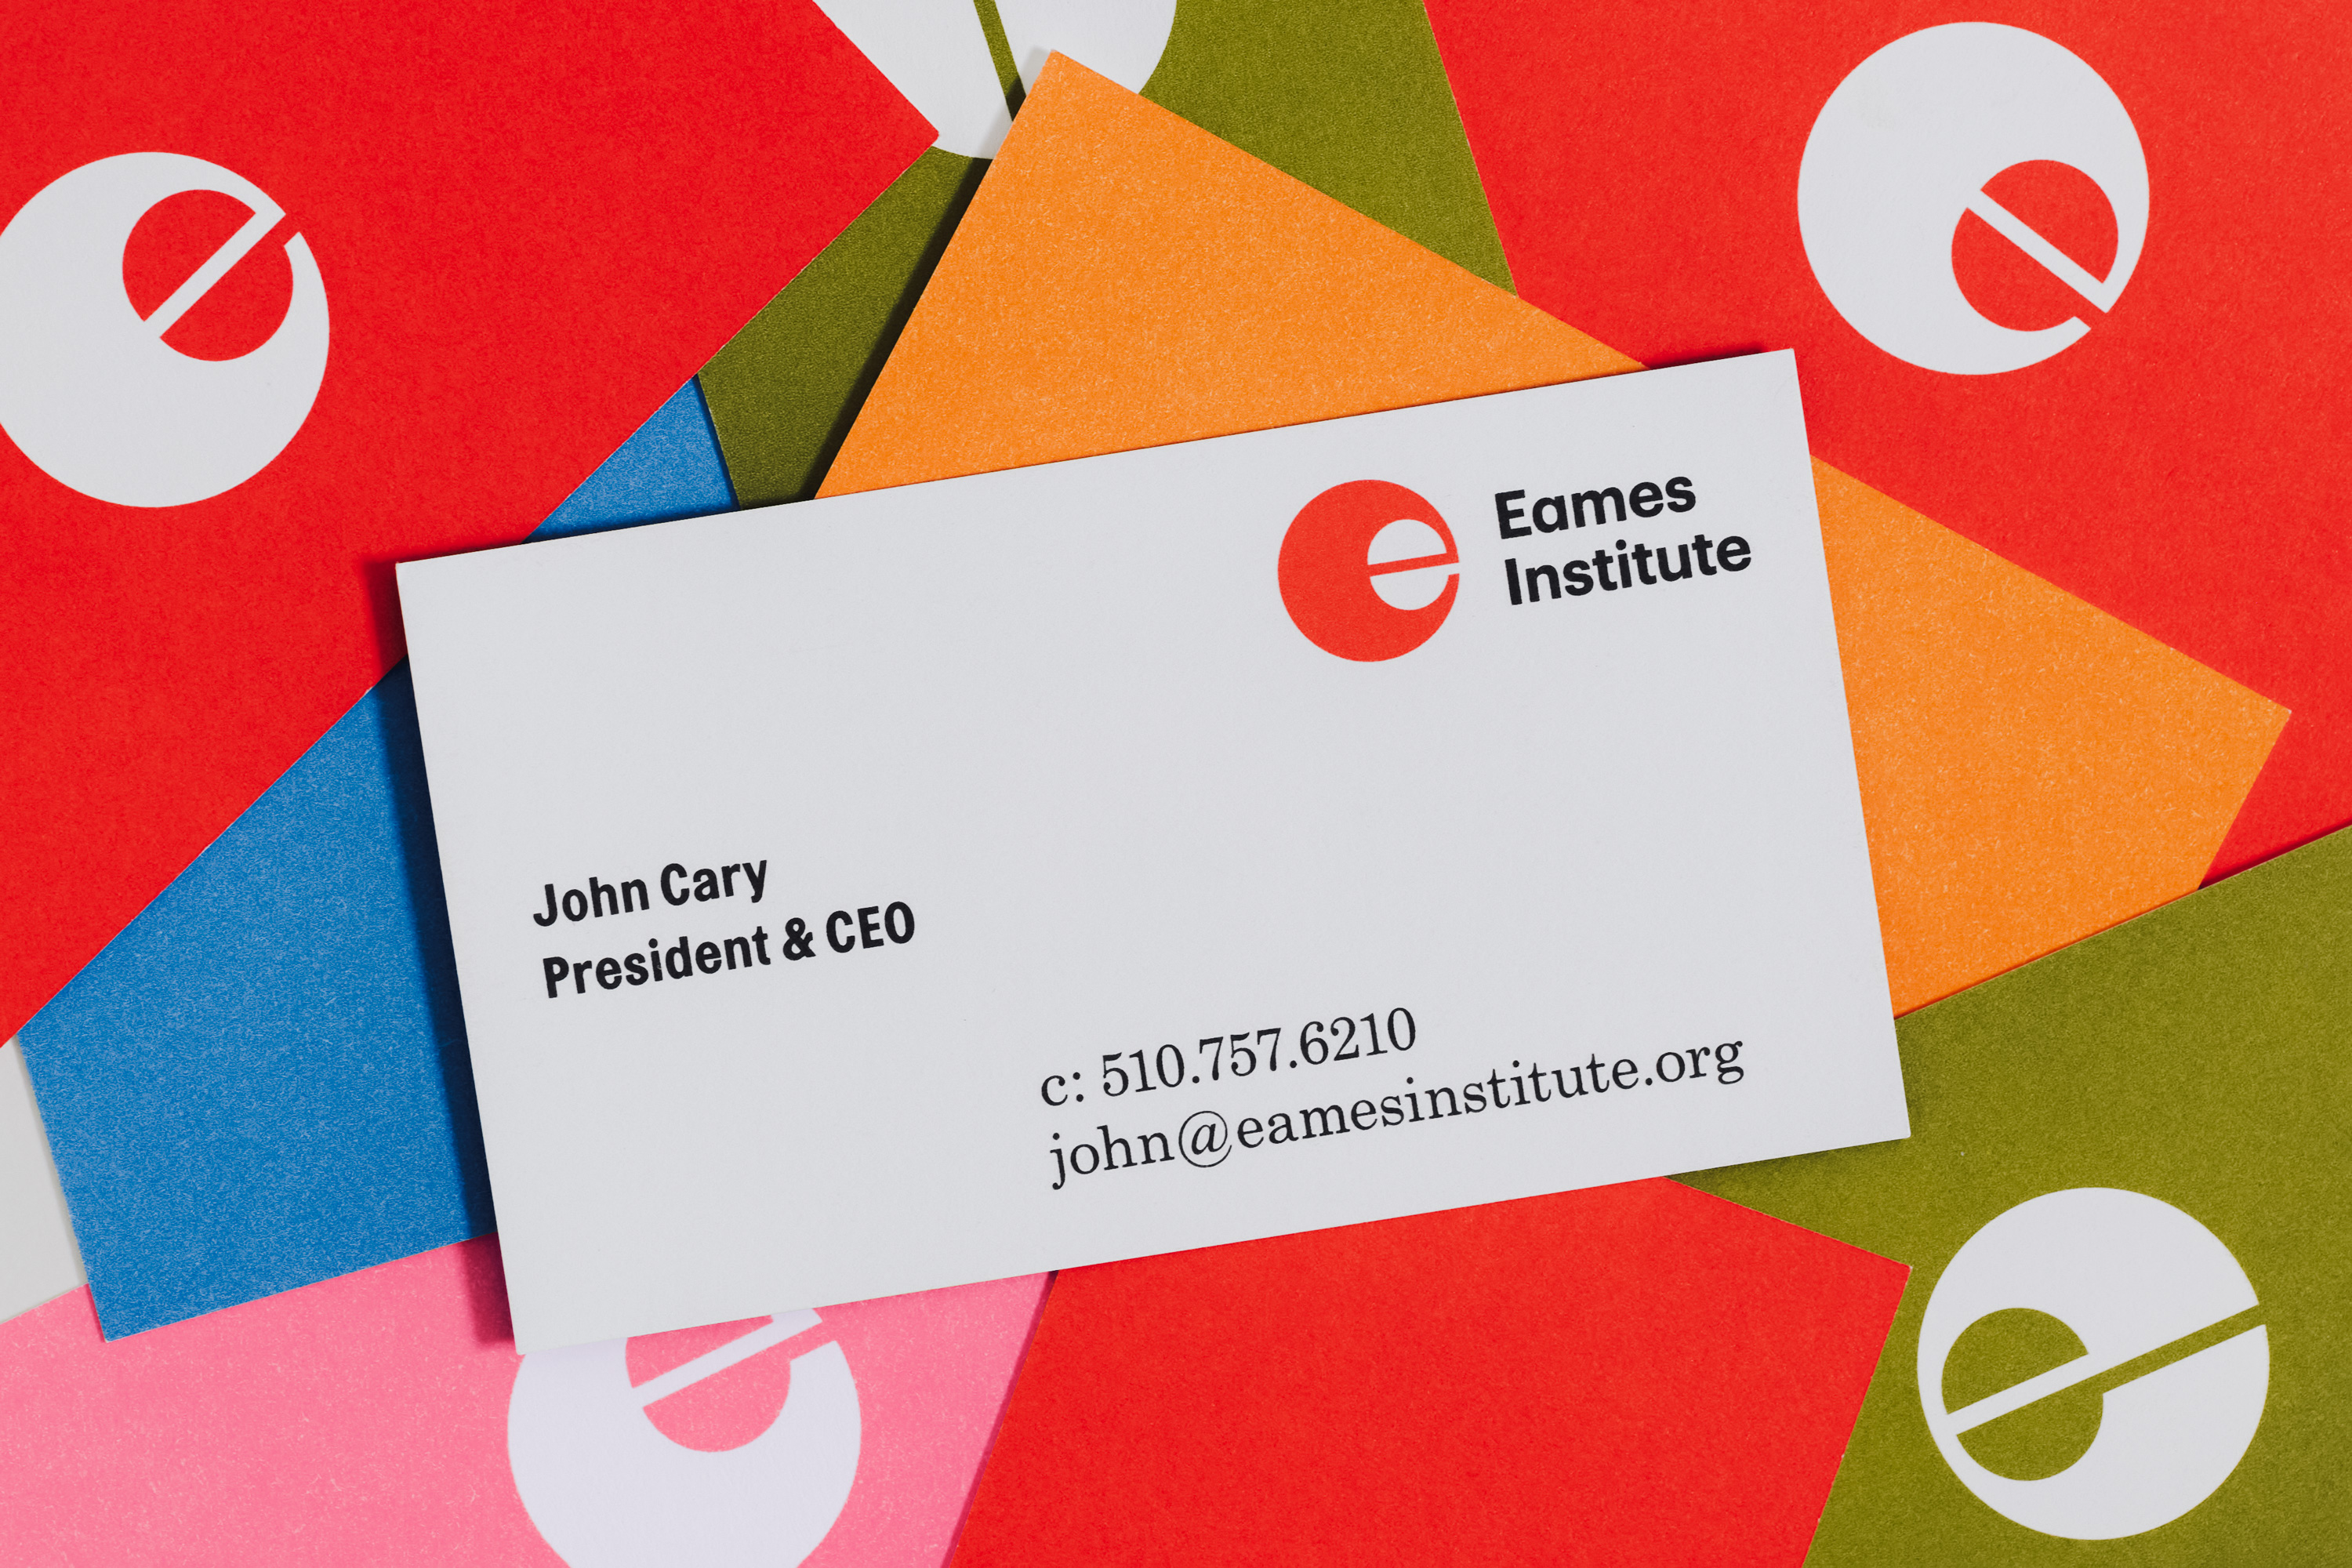 Logo and business cards designed by San Francisco-based studio Manual for The Eames Institute